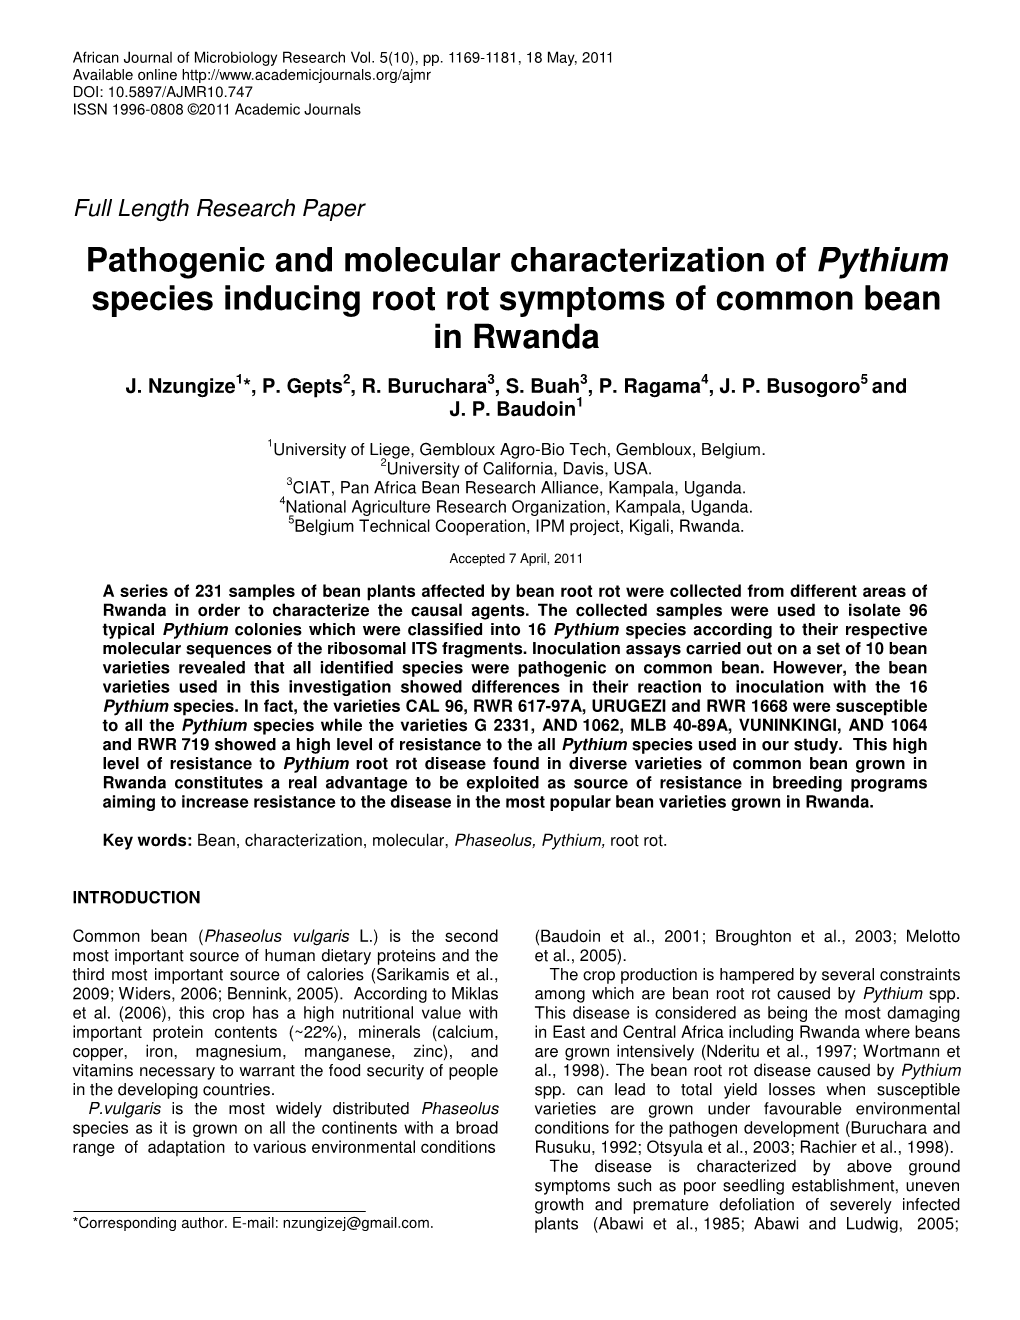 Pathogenic and Molecular Characterization of Pythium Species Inducing Root Rot Symptoms of Common Bean in Rwanda